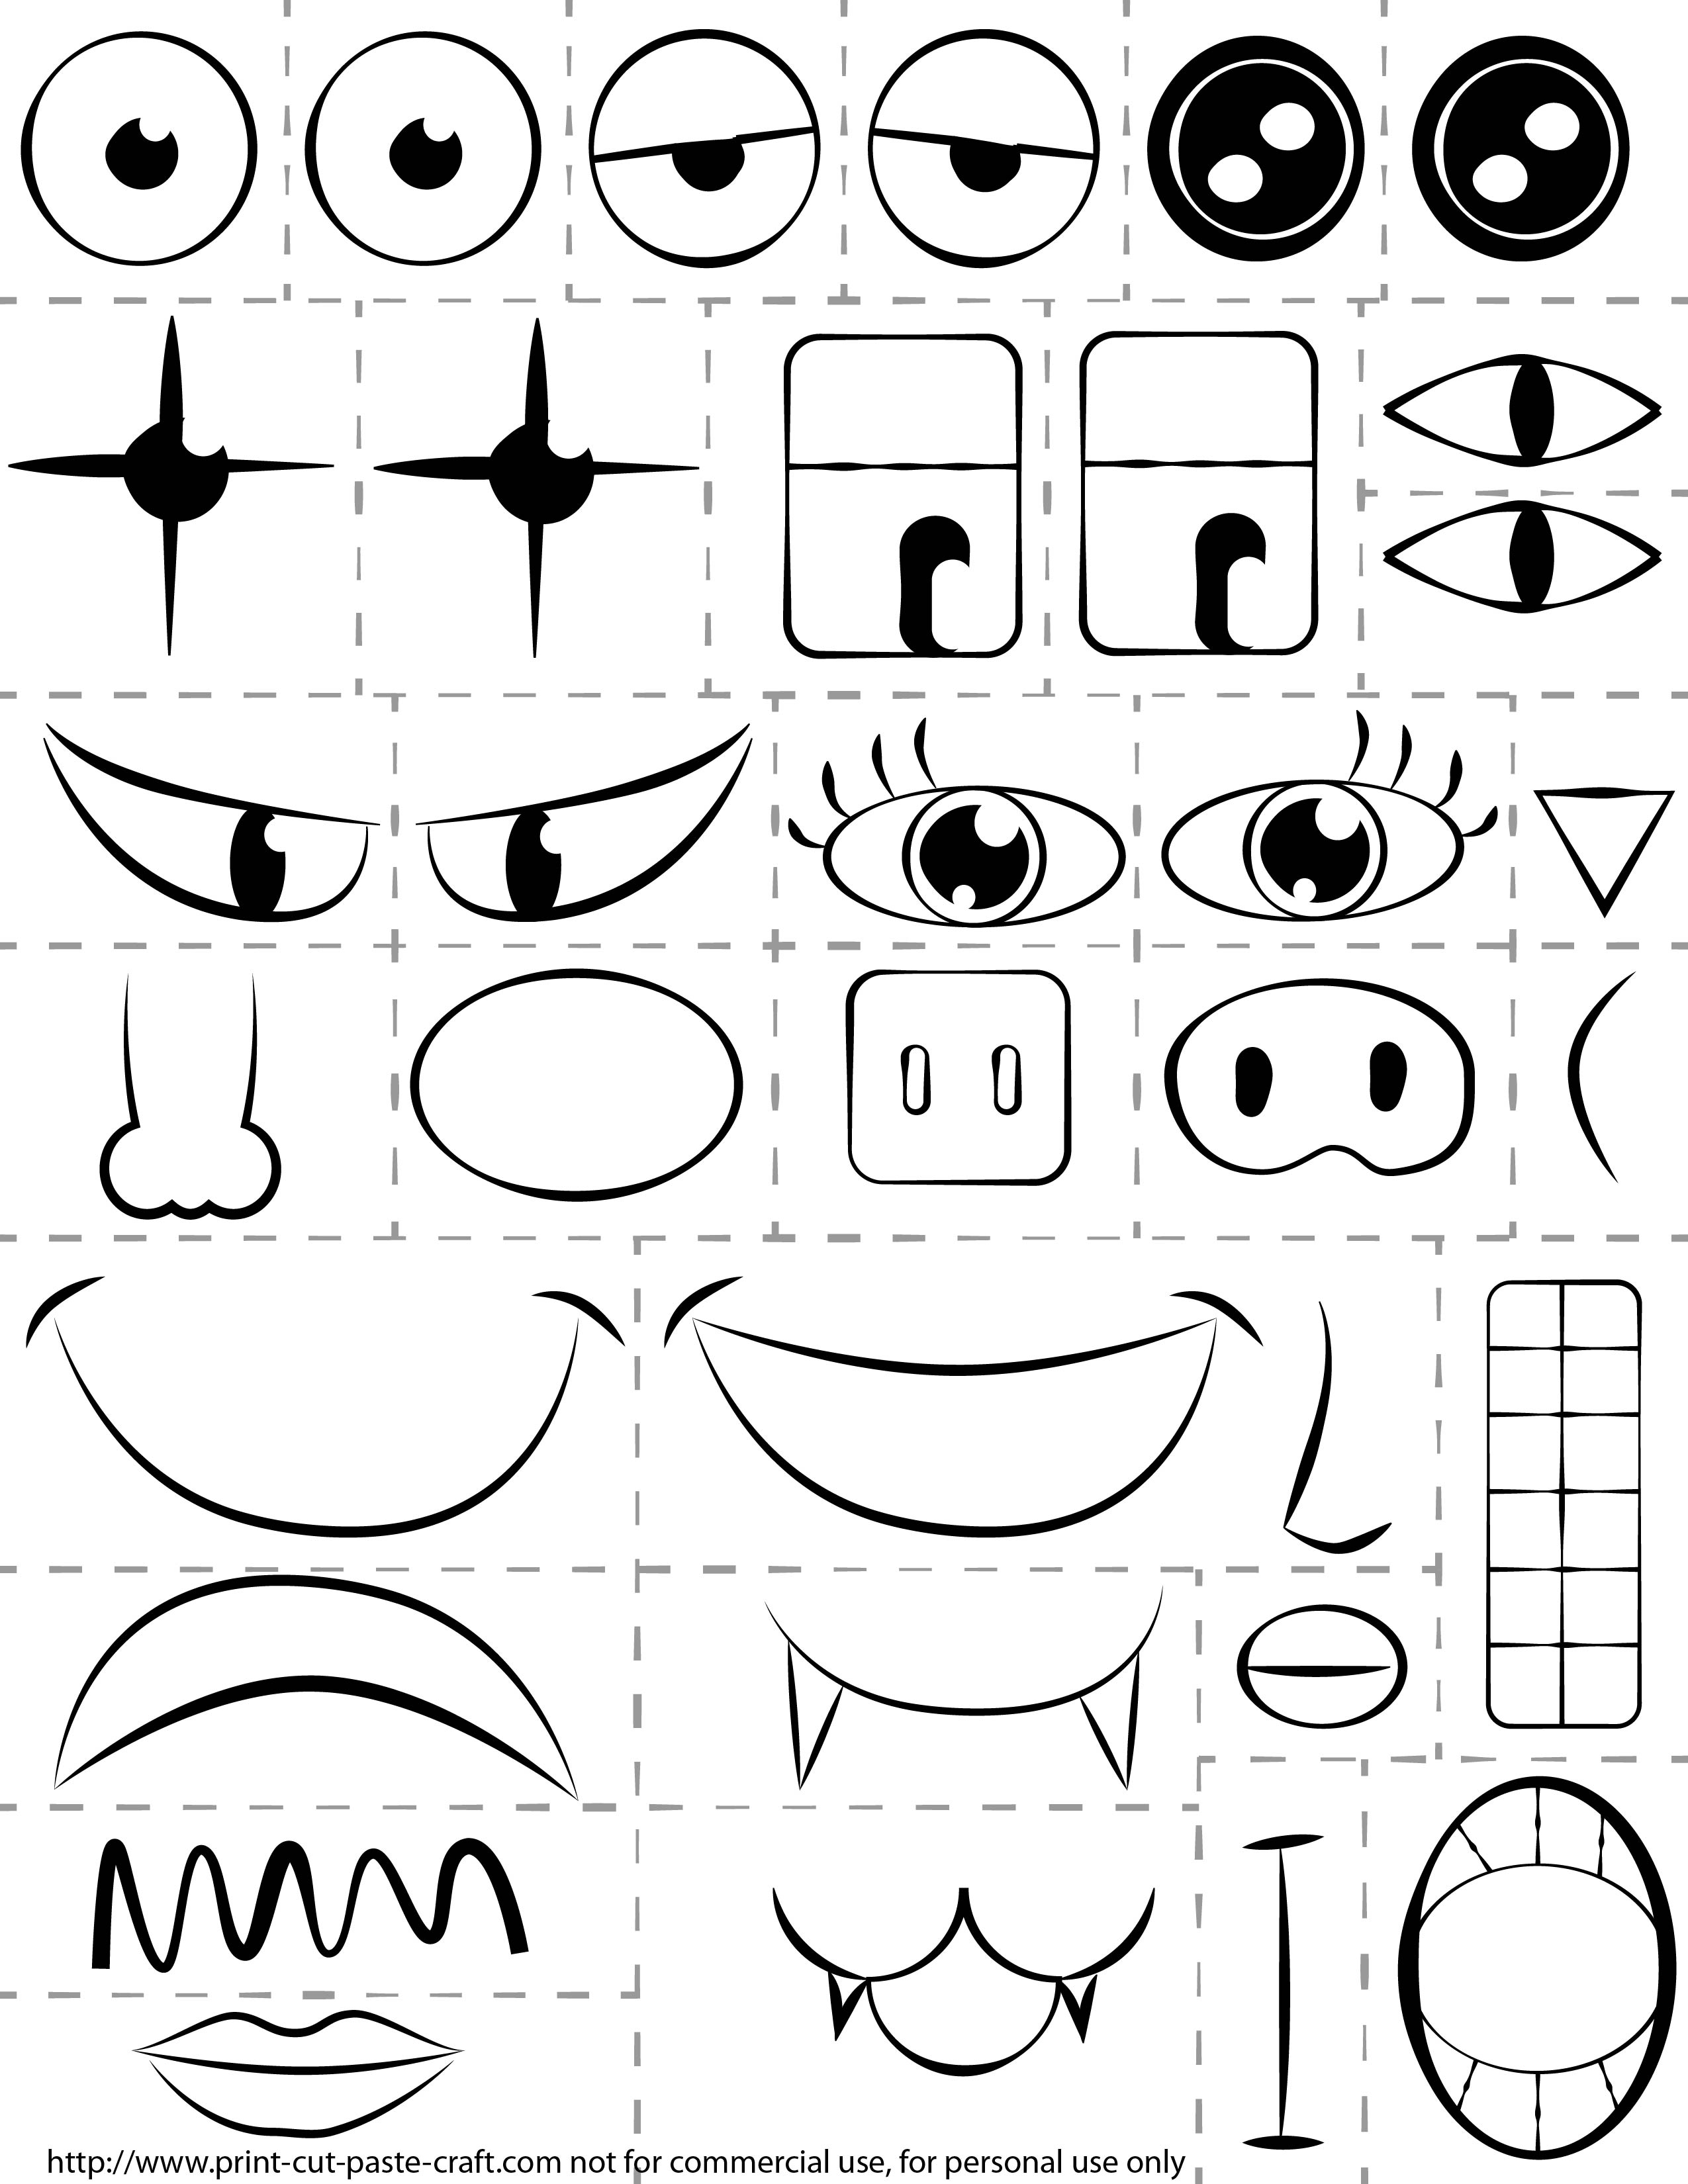 5 Best Images of Cut Out Face Parts Printable Printable Face Parts